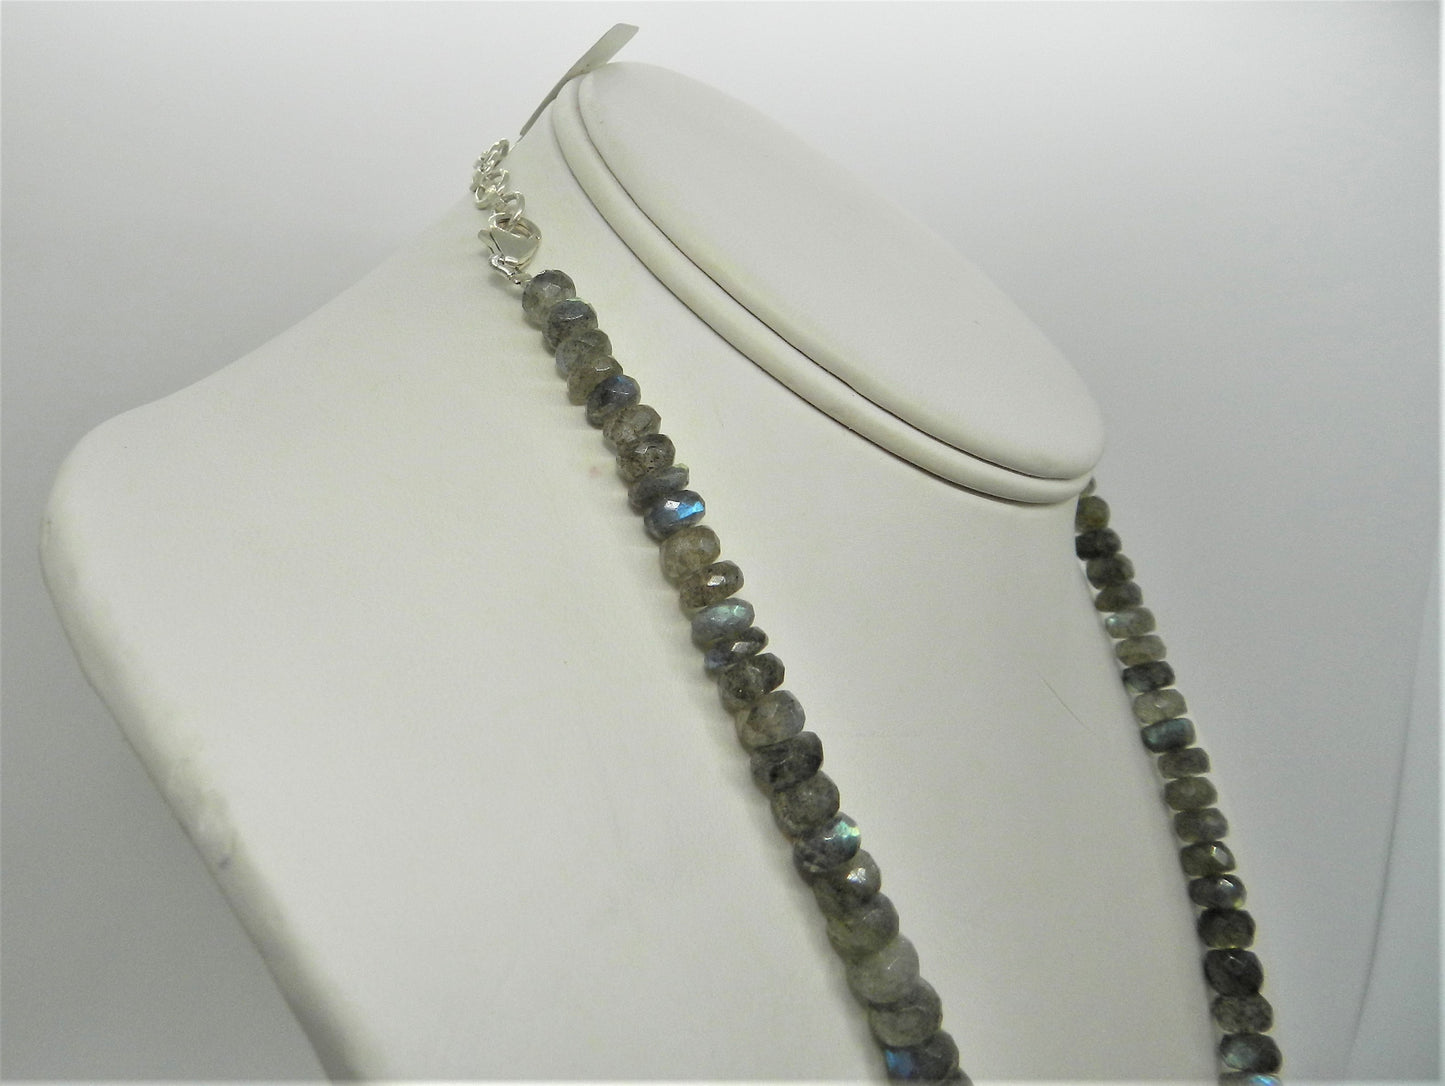 18" Authentic Labradorite Necklace Sterling Clasp